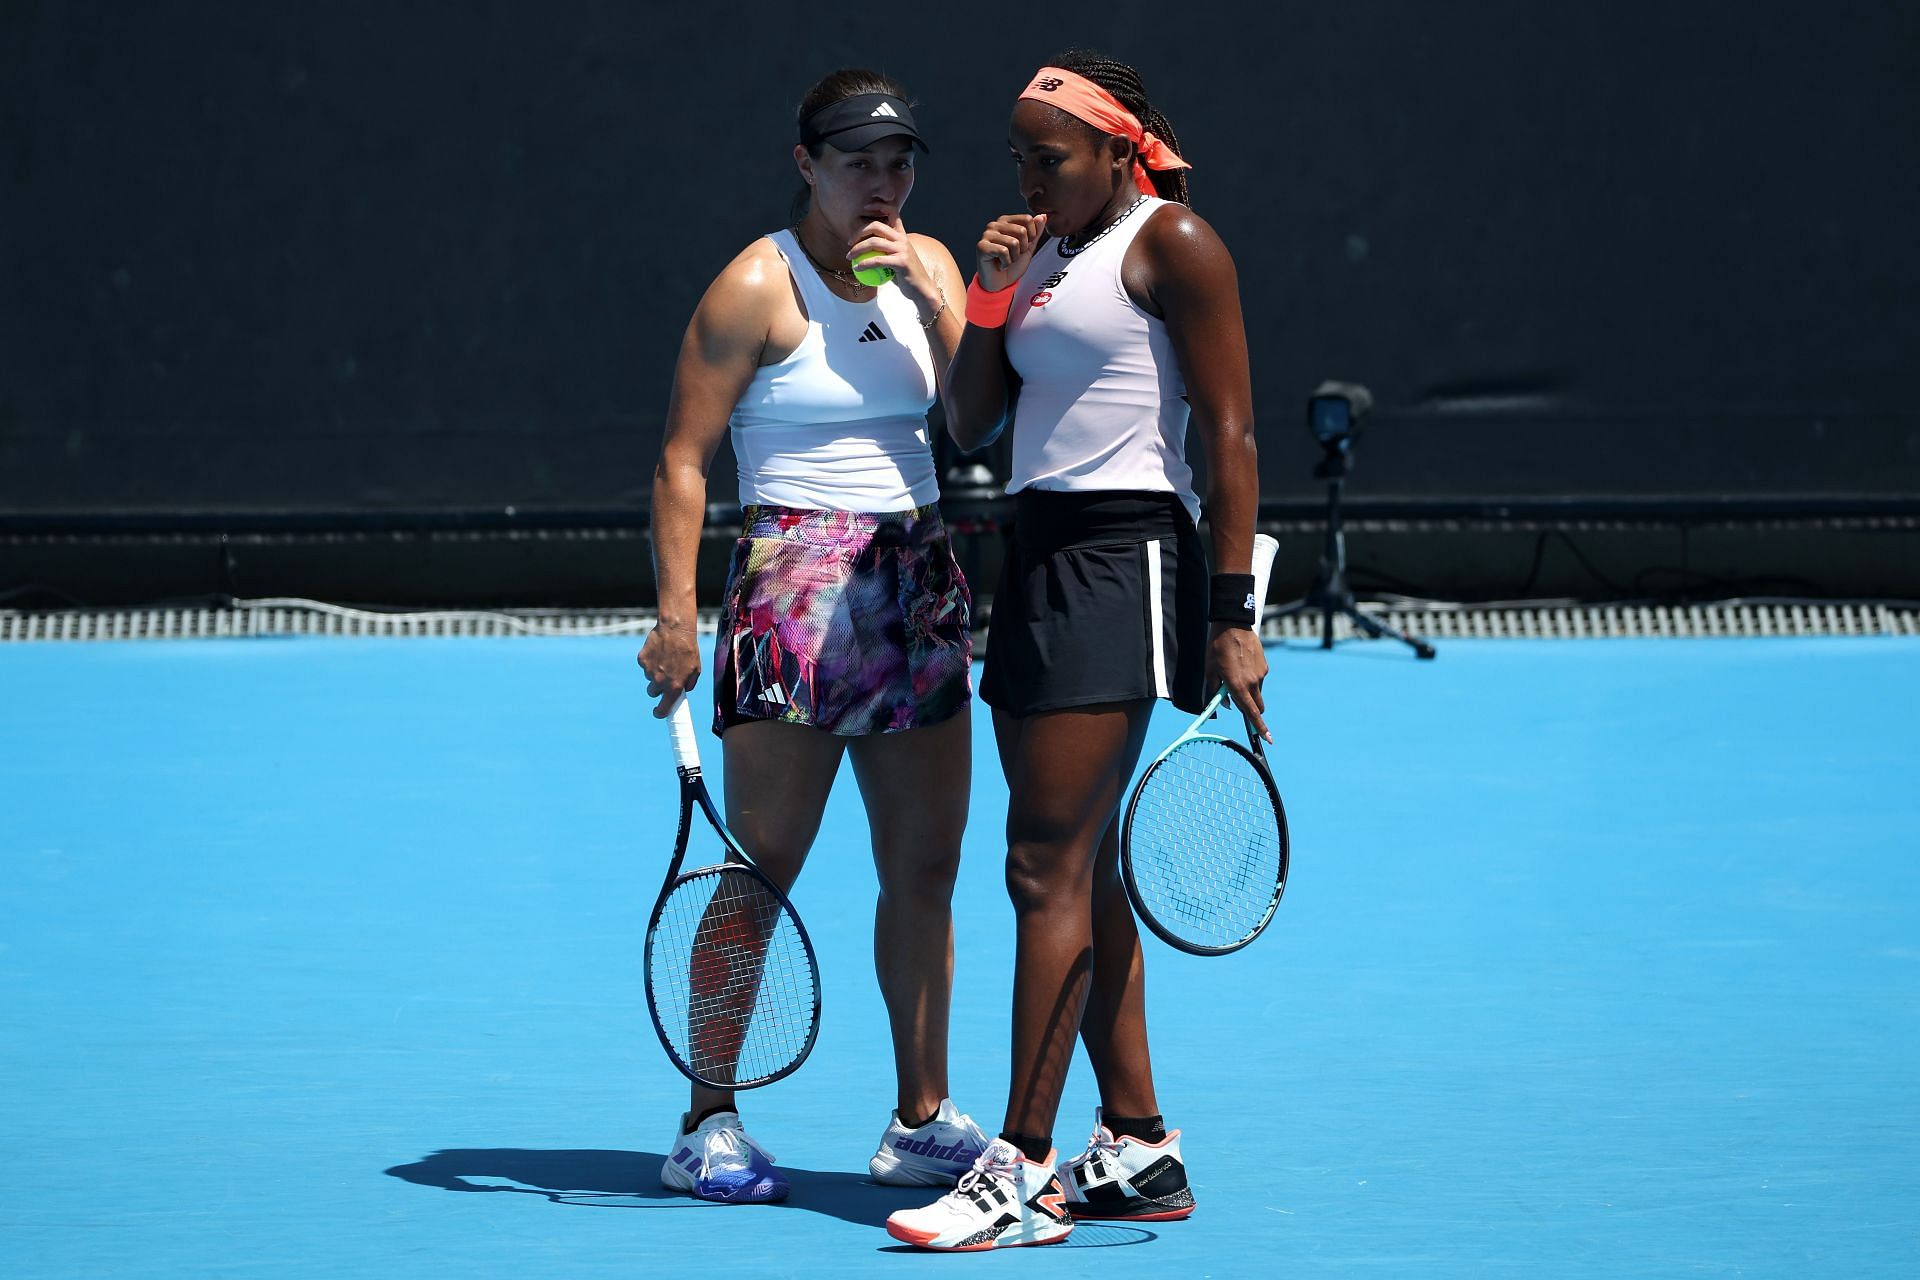 Coco Gauff and Jessica Pegula in action at the 2023 Australian Open